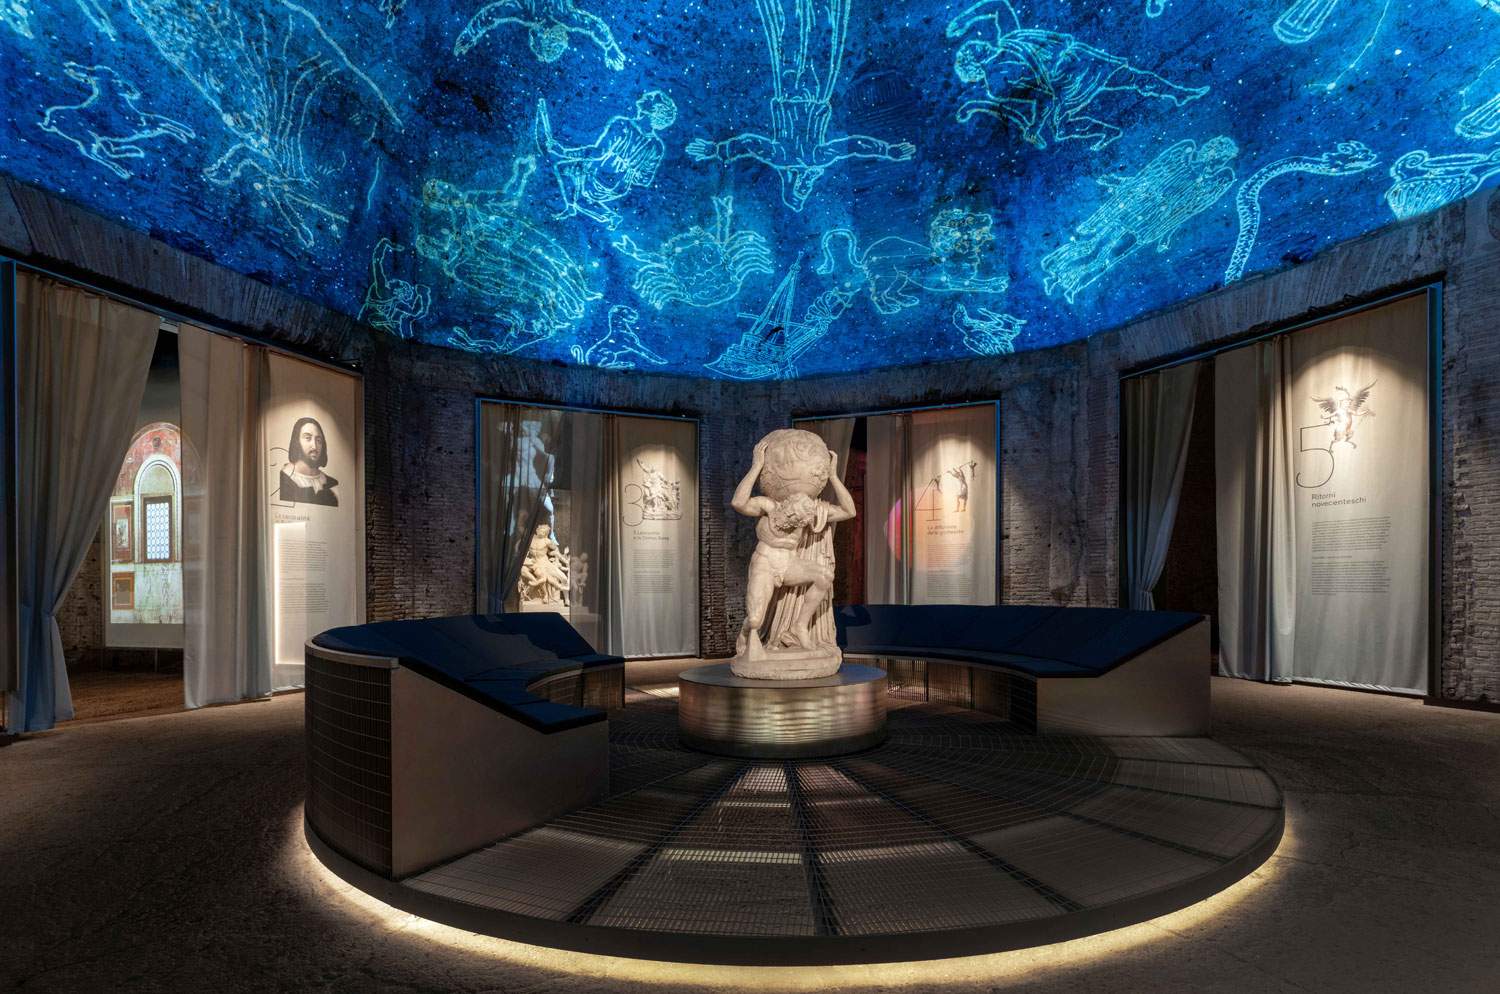 Rome, Domus Aurea reopens, with new entrance and grotesque discovery exhibition